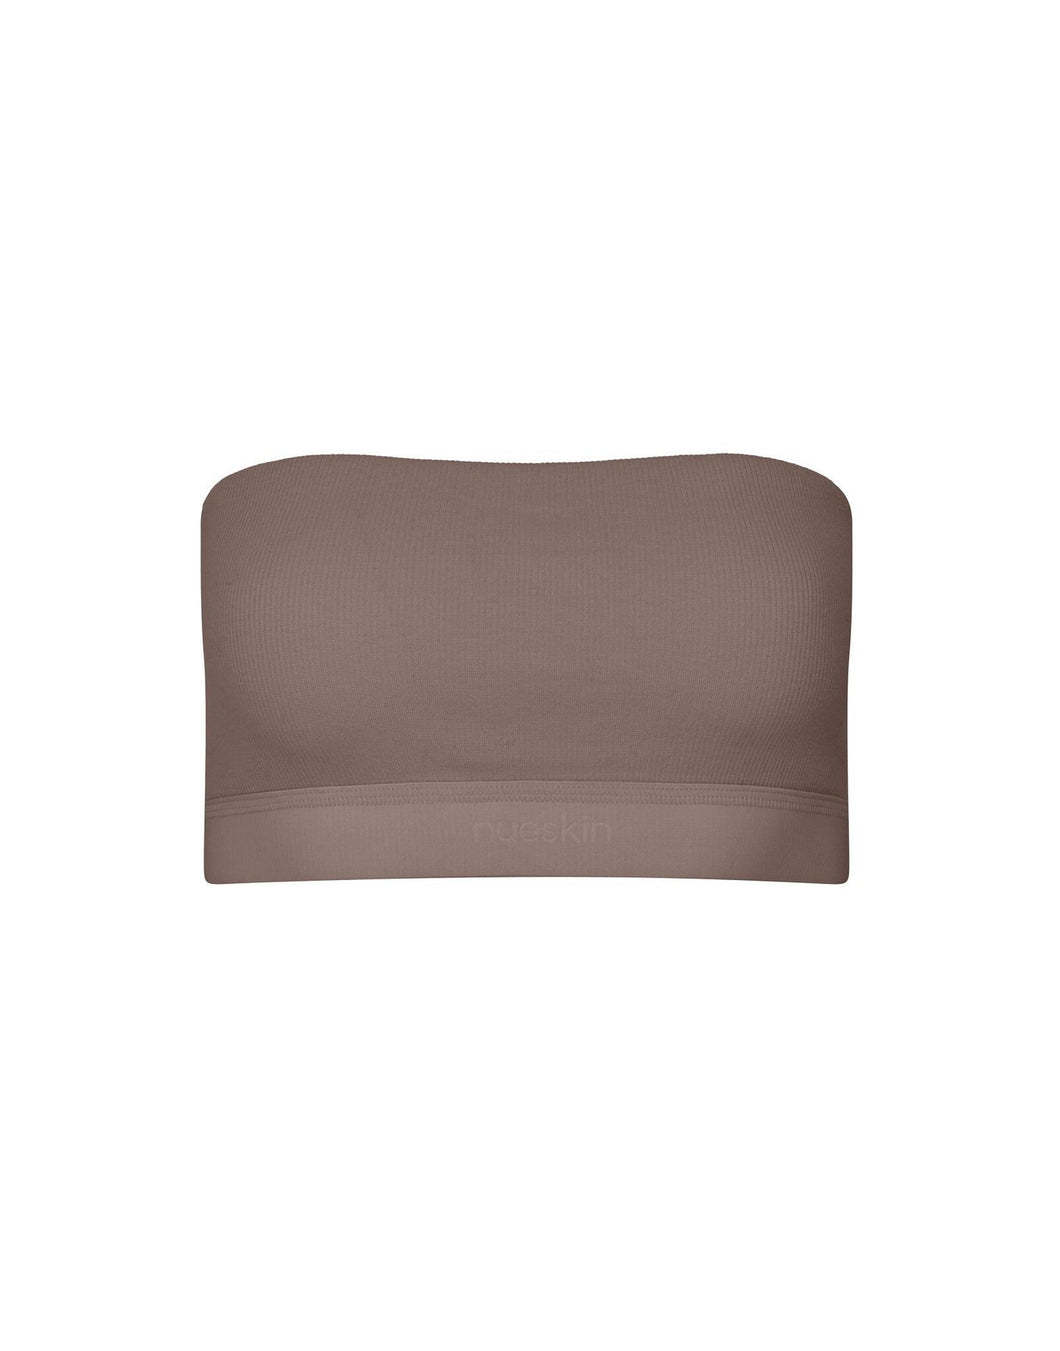 nueskin Robin in color Deep Taupe and shape bandeau